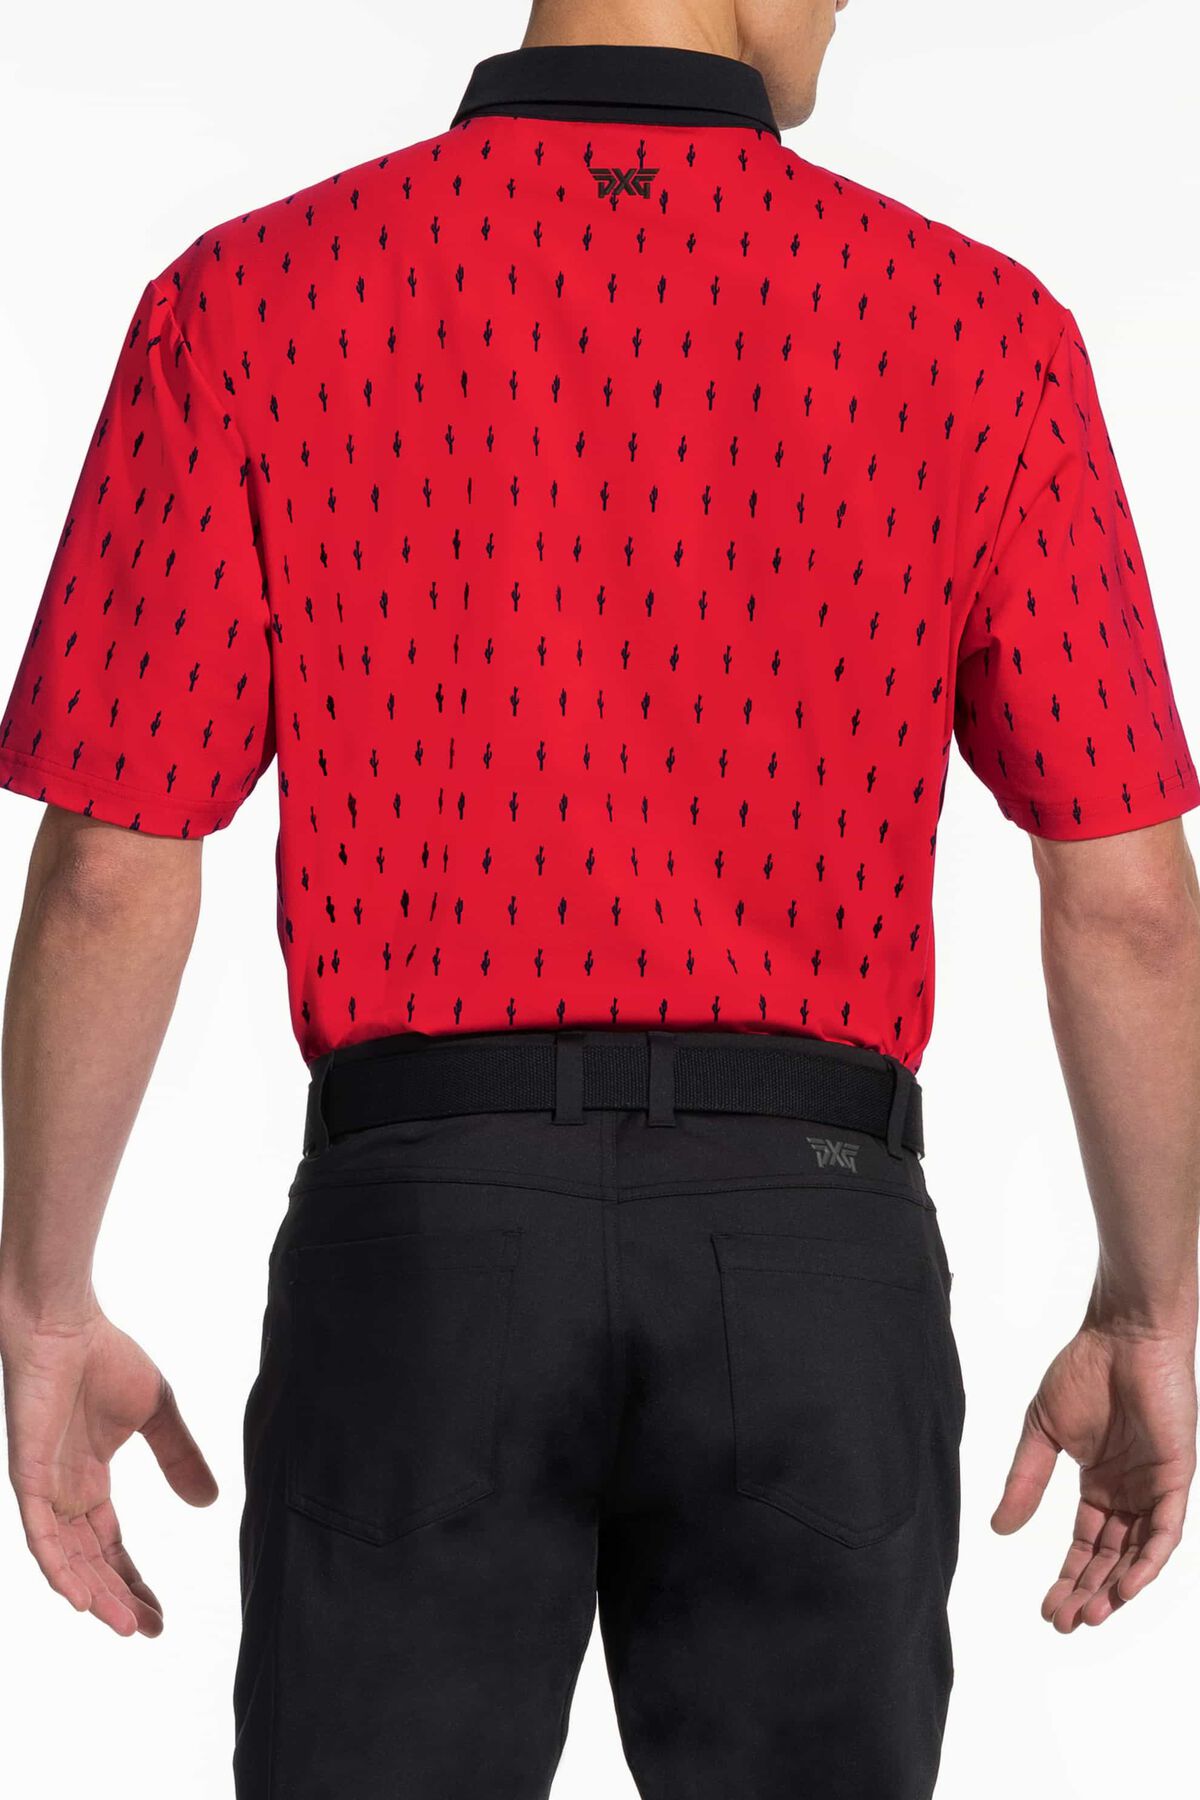 Comfort Fit Cactus Print Polo Red